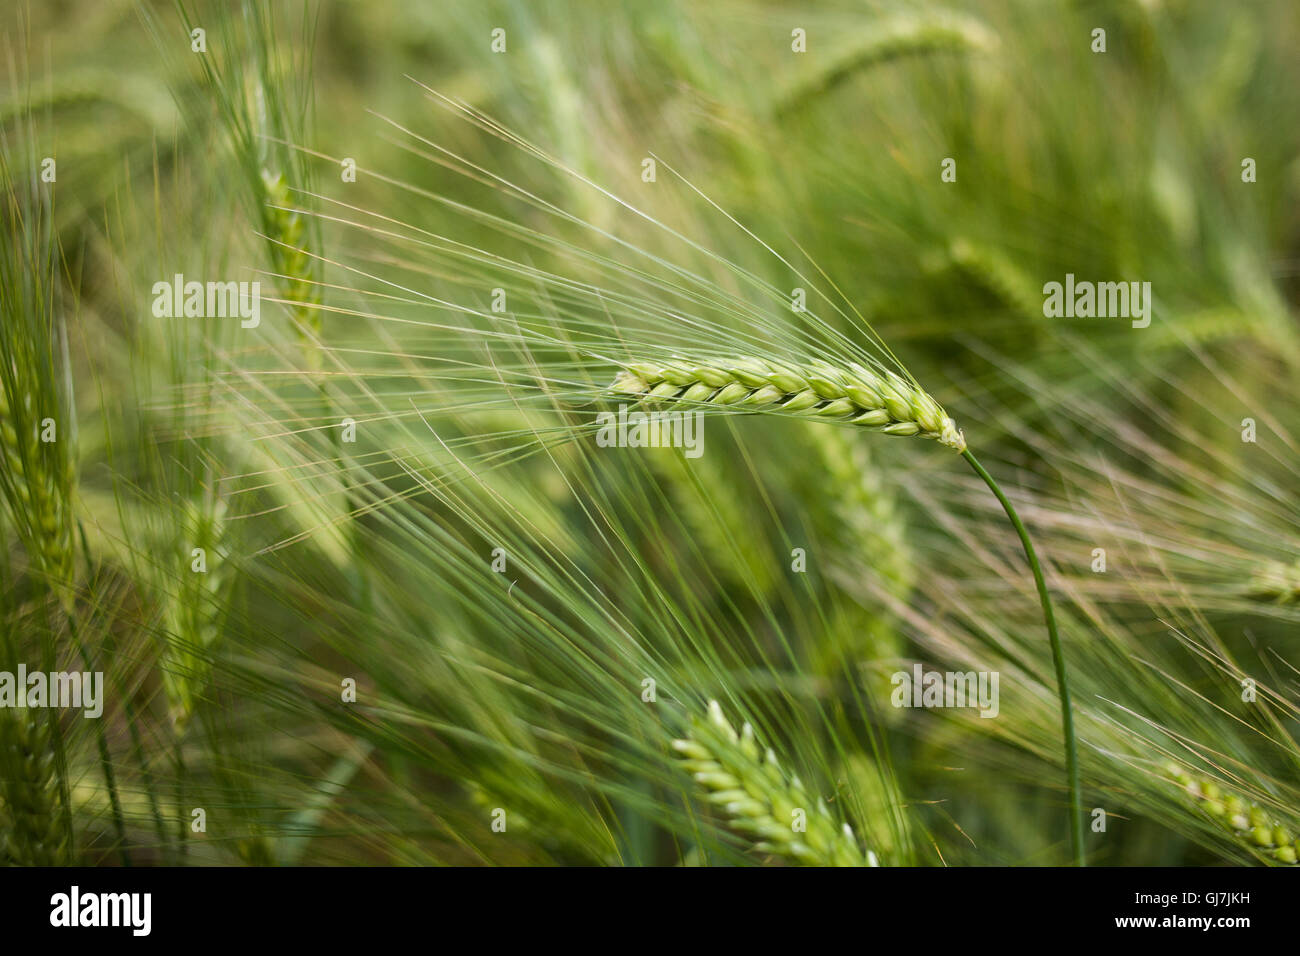 Barley ripening in a field. Stock Photo